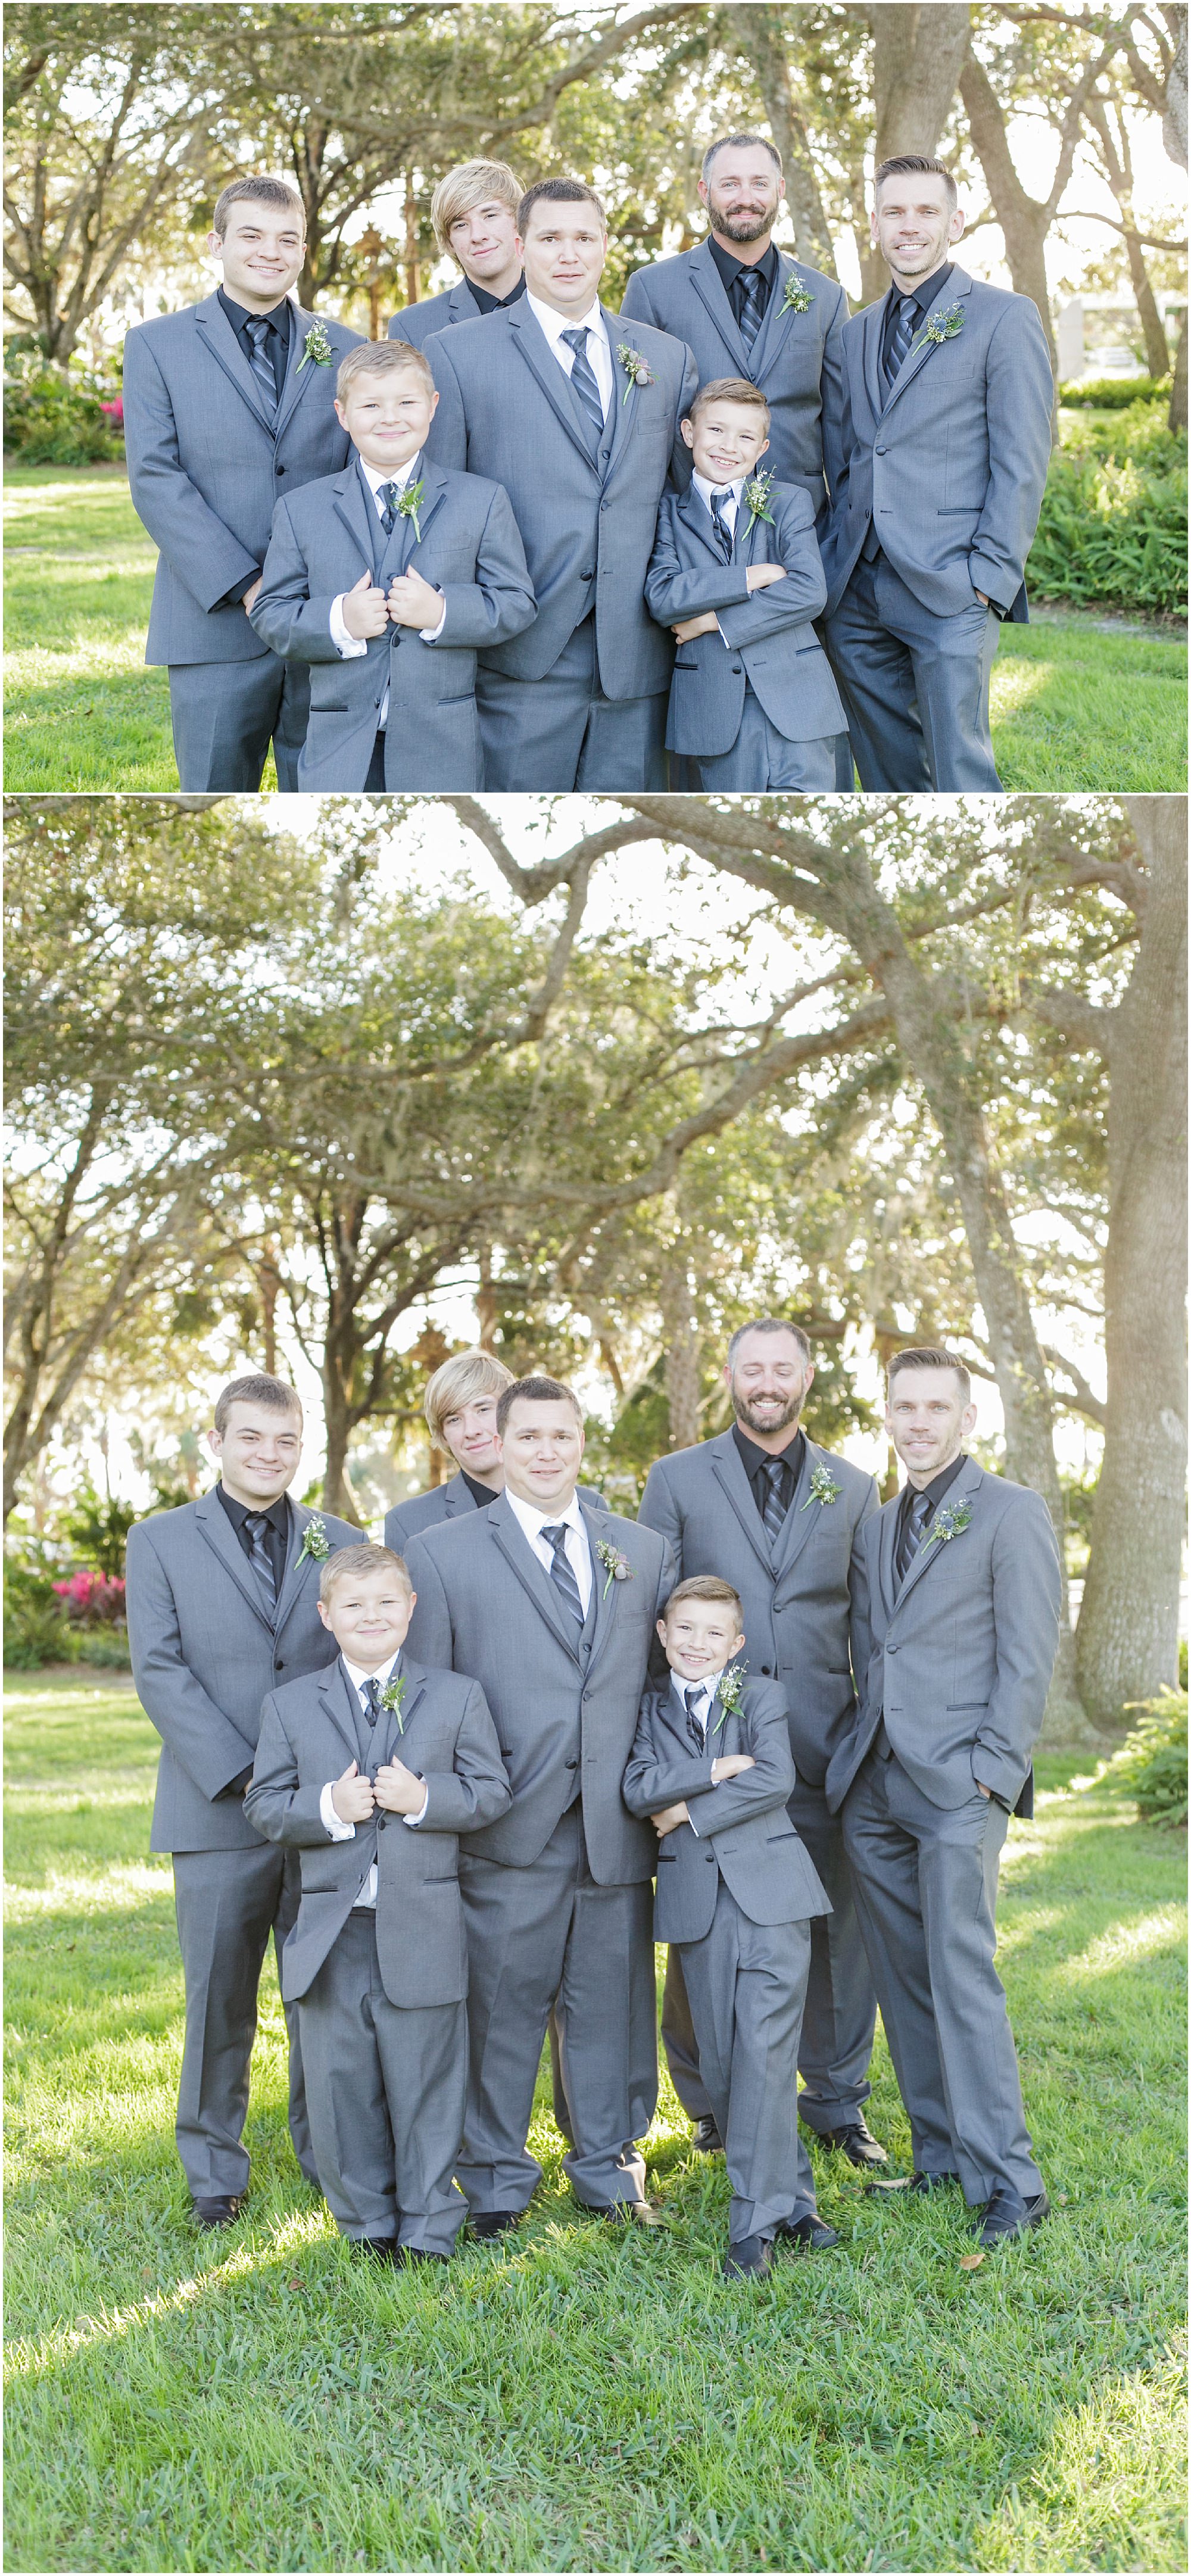 Groom and the groomsmen posing for photos outdoors. 